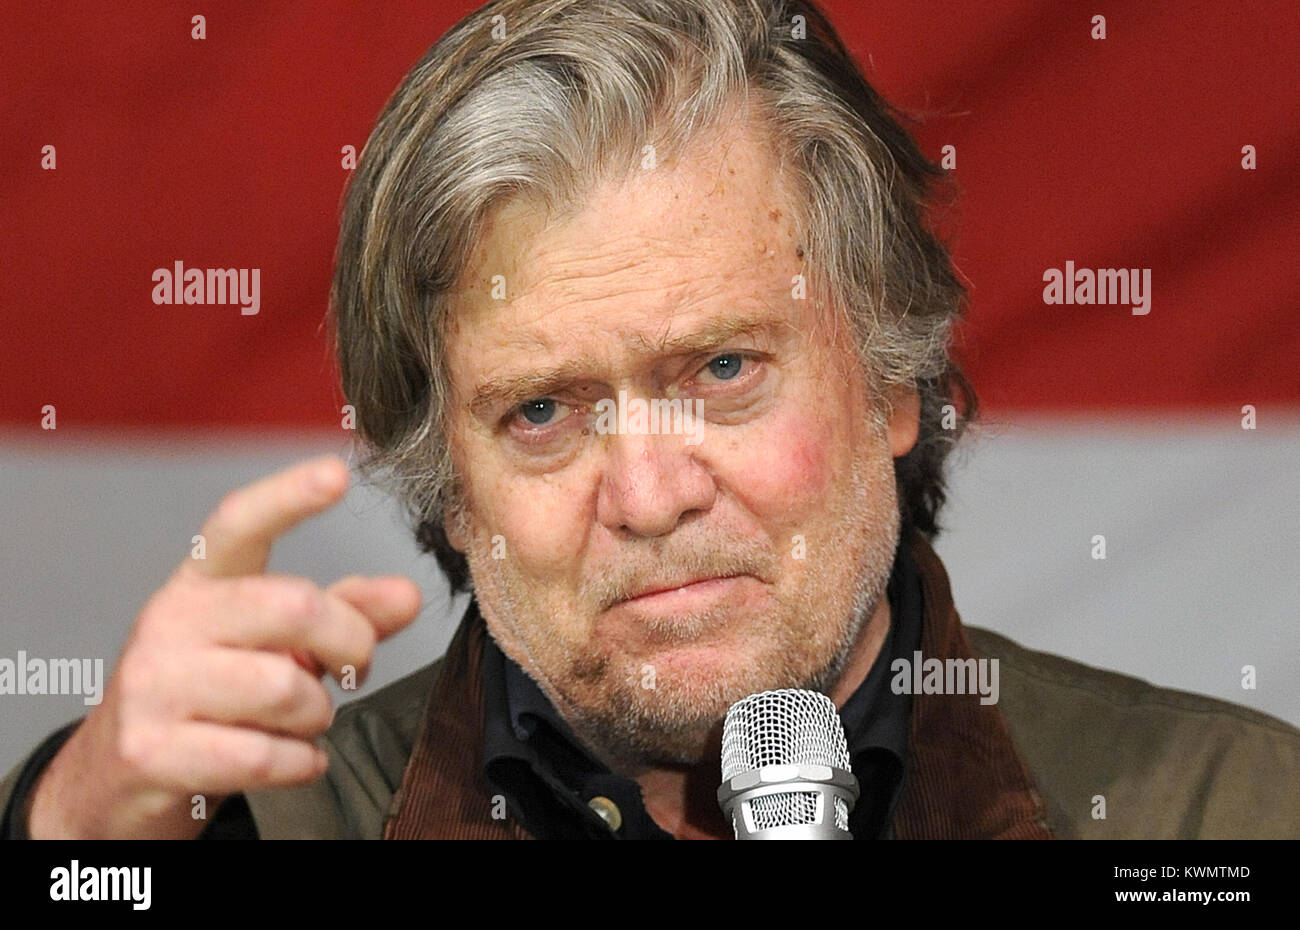 FILE: Photo taken Fairhope, Alabama, USA. 5th Dec, 2017. Steve Bannon, executive chairman of Breitbart News and former chief strategist for U.S. President Donald Trump, speaks at a campaign rally for Republican U.S. Senate candidate Judge Roy Moore on December 5, 2017 at Oak Hollow Farm in Fairhope, Alabama. On January 3, 2018, U.S. President Donald Trump threatened Bannon with legal action, saying Bannon had 'lost his mind' after being fired from the White House. Credit: Paul Hennessy/Alamy Live News Stock Photo